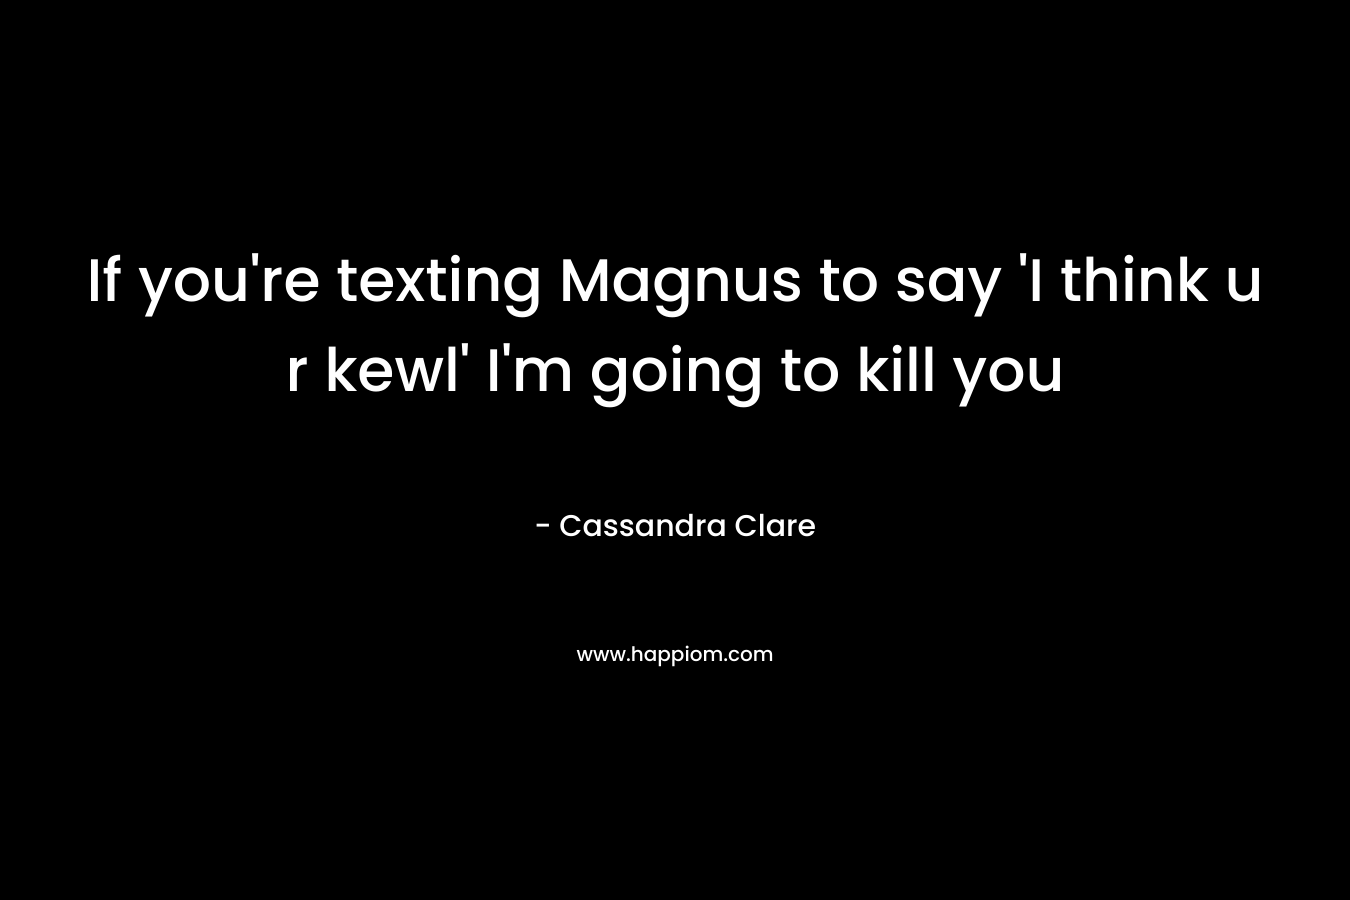 If you’re texting Magnus to say ‘I think u r kewl’ I’m going to kill you – Cassandra Clare